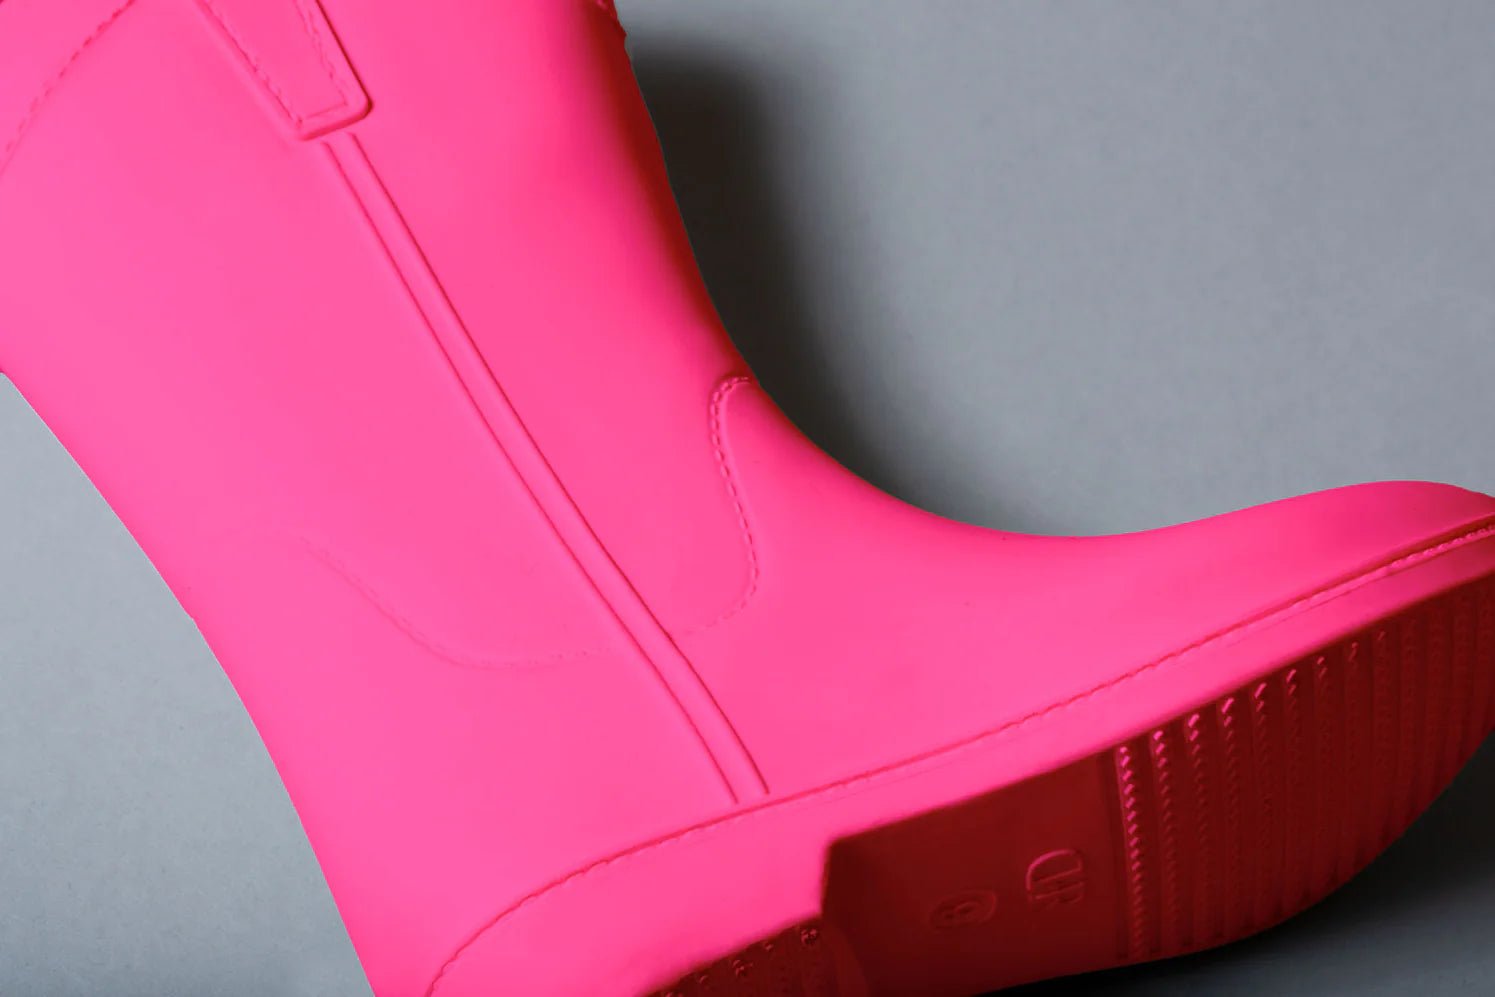 Atomic Pink Kid's All Weather Rubber Cowboy Boots - Something about Sofia